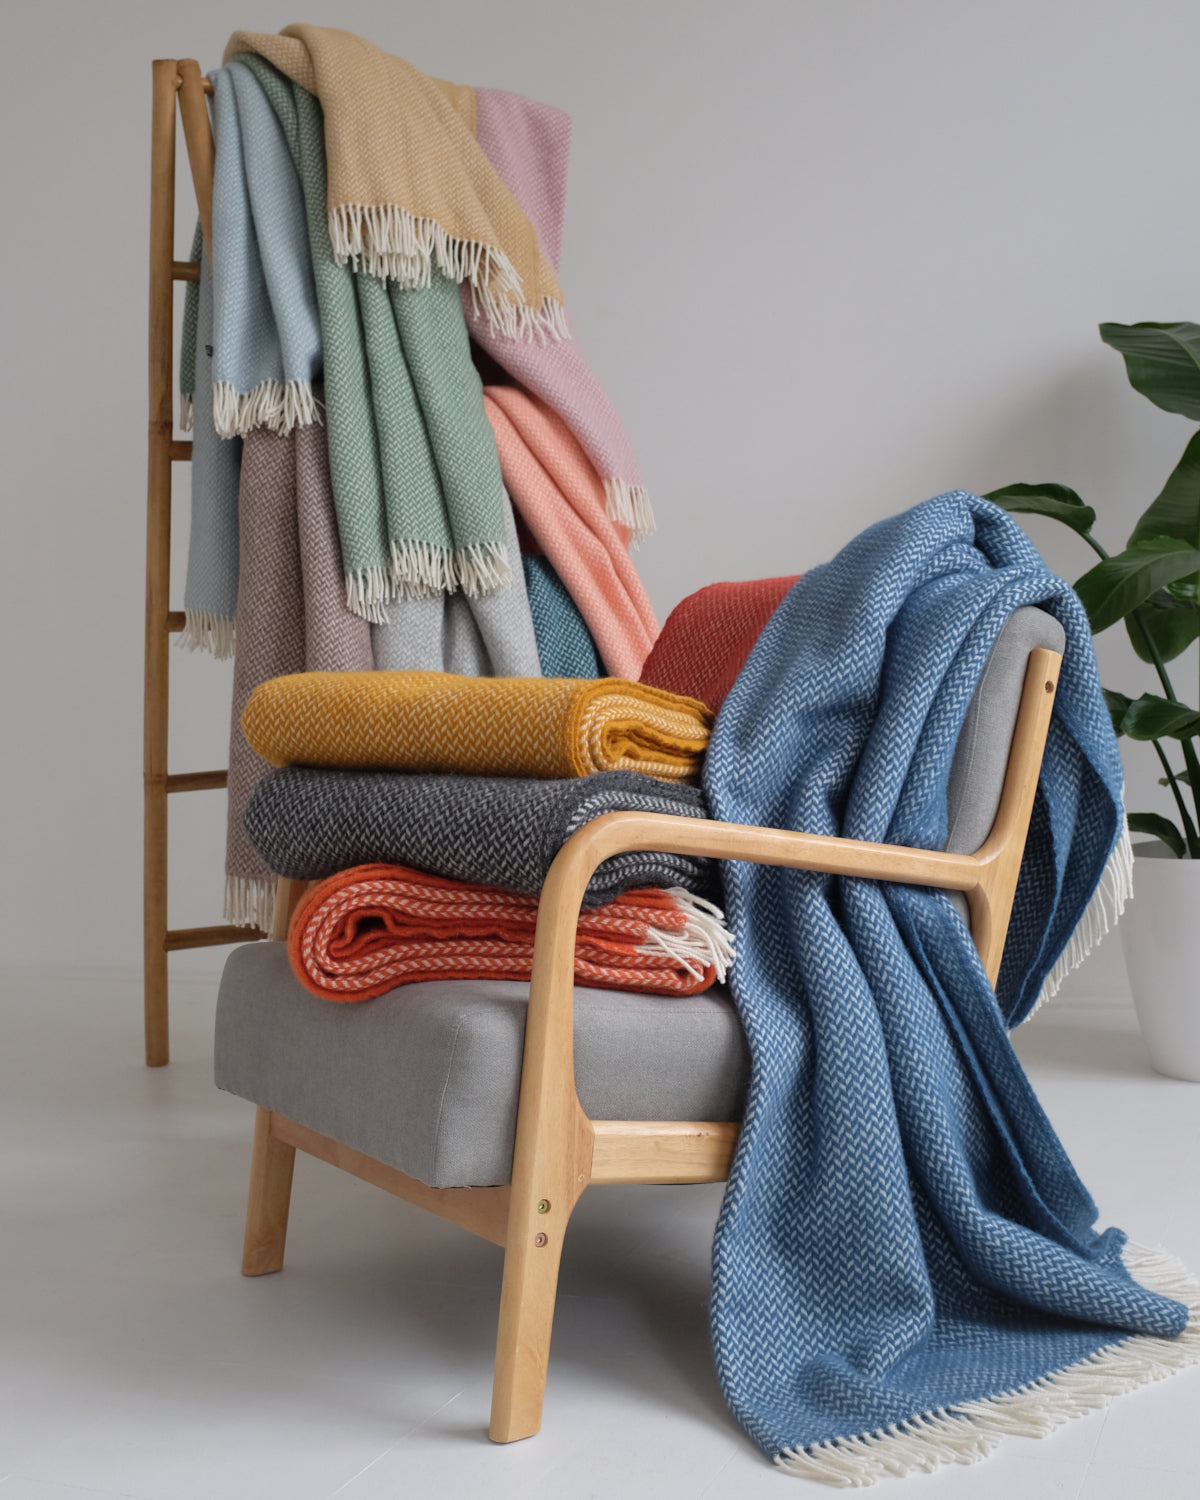 A stack of folded wool blankets on a lounge chair. Wool blankets hanging on a wooden ladder is in the background